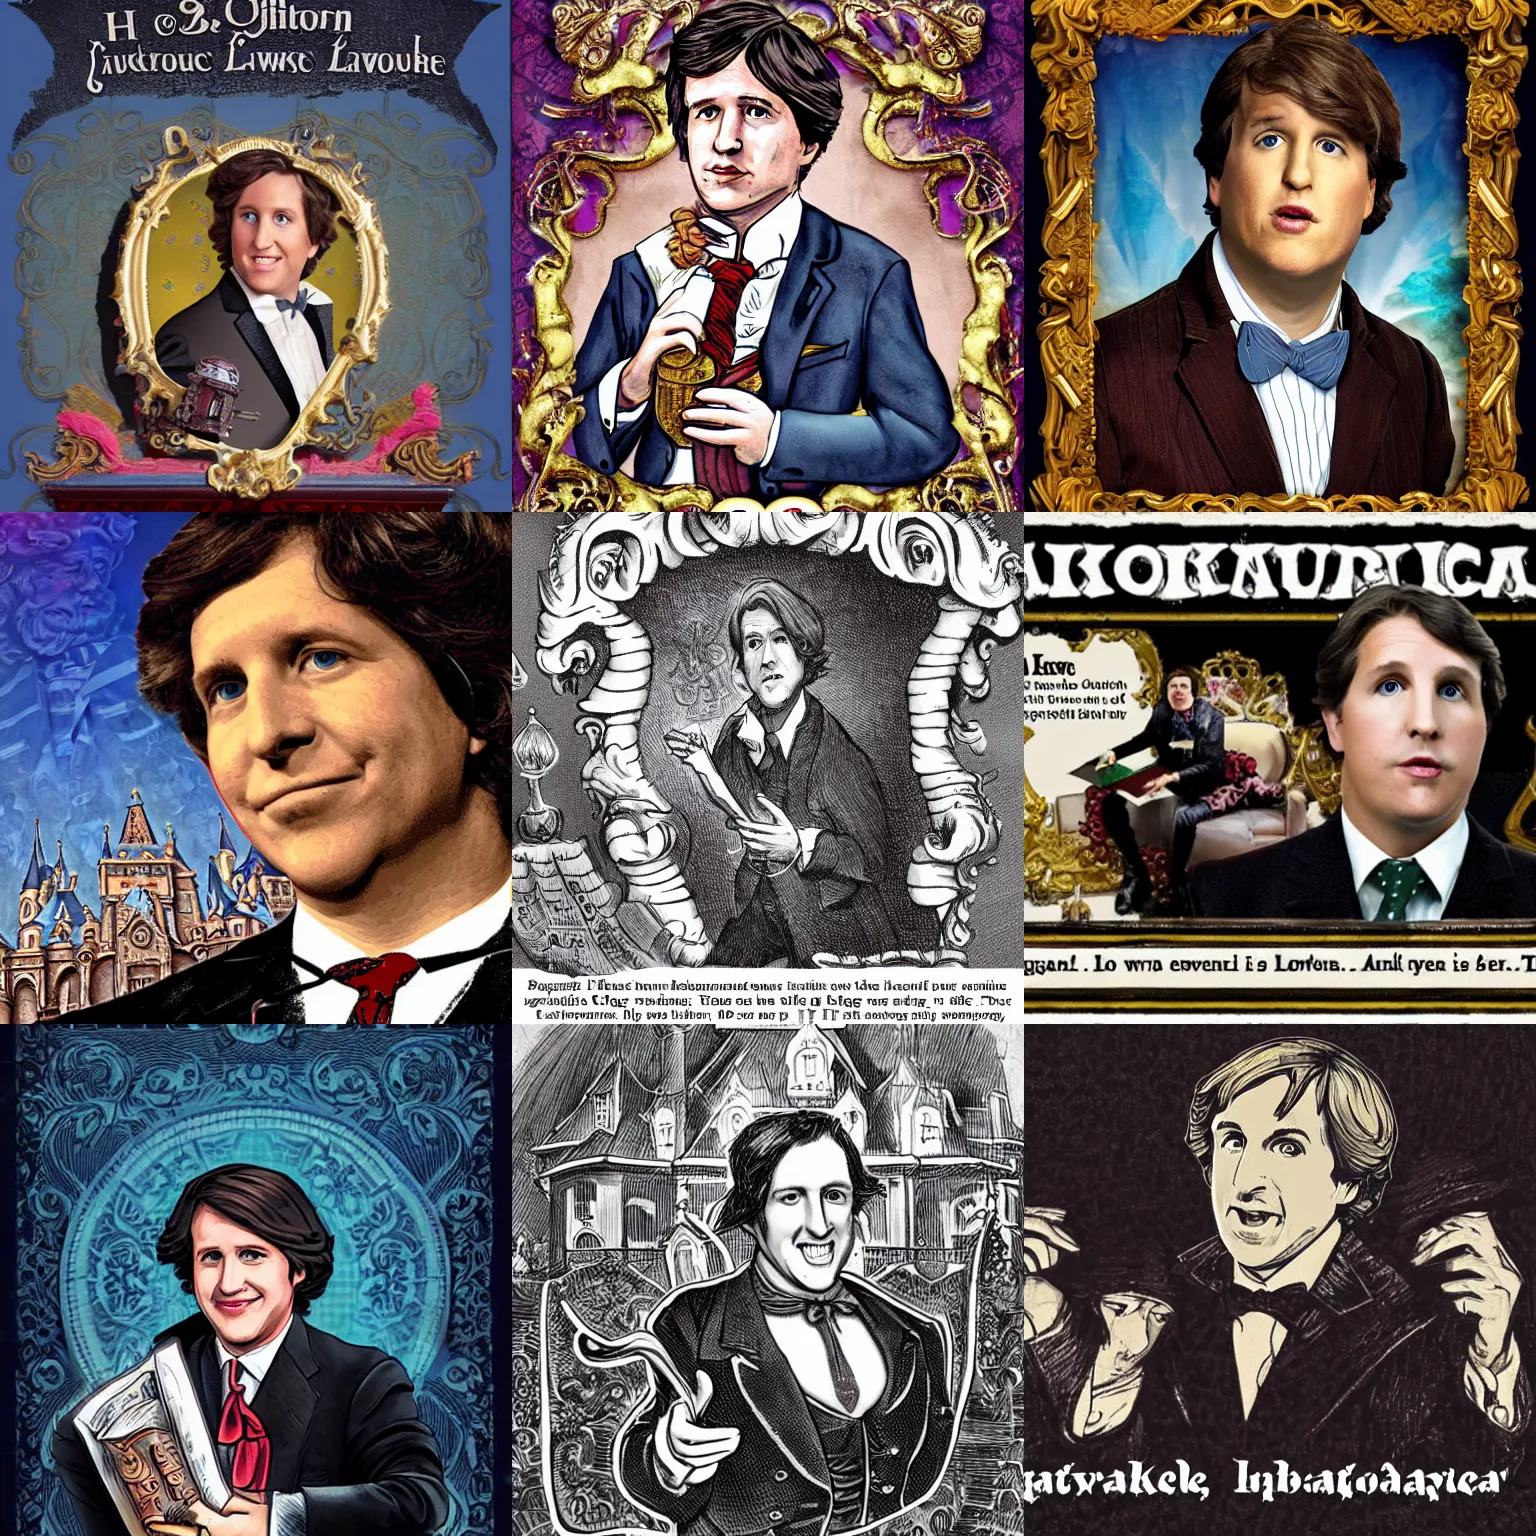 Prompt: baroque Disneyland advertisement featuring Tucker Carlson in the style of H.P. Lovecraft